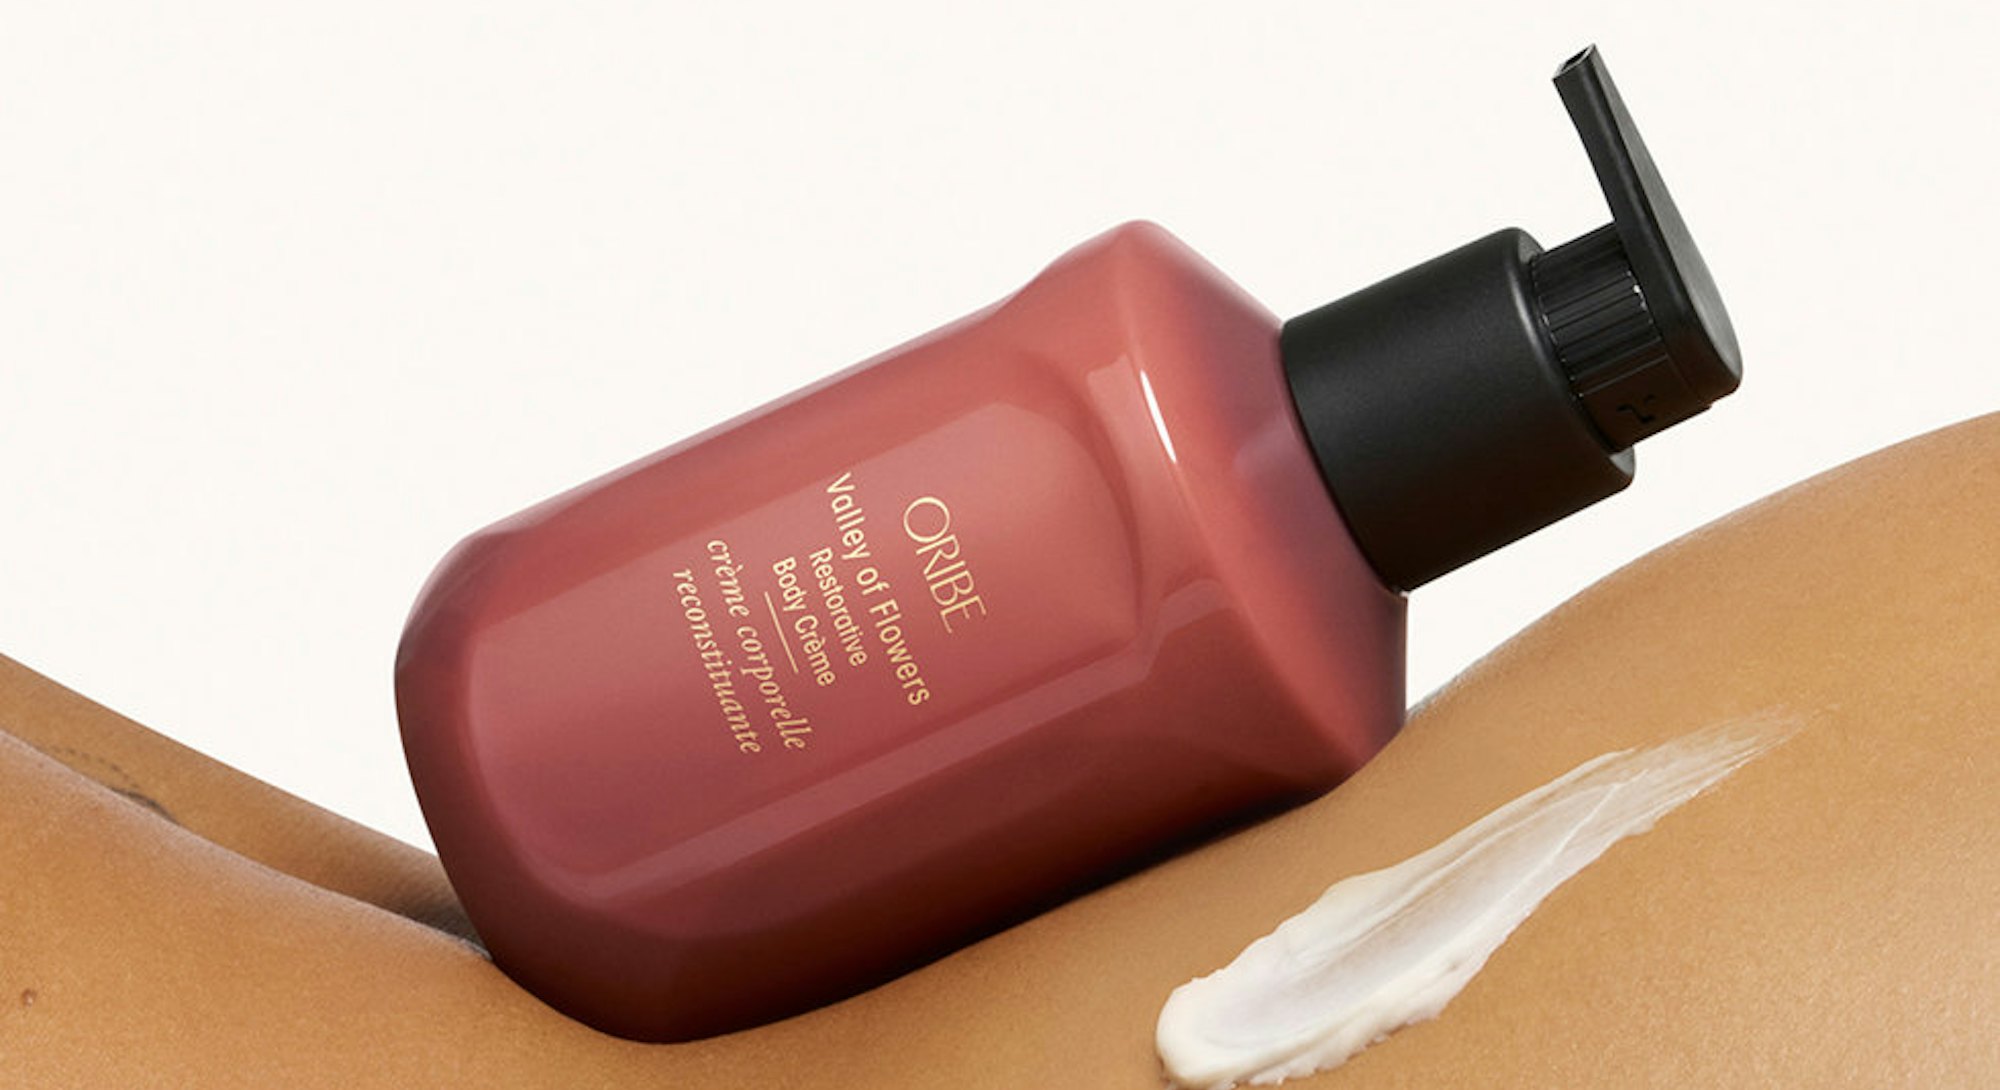 Oribe released new body care products in August 2022.